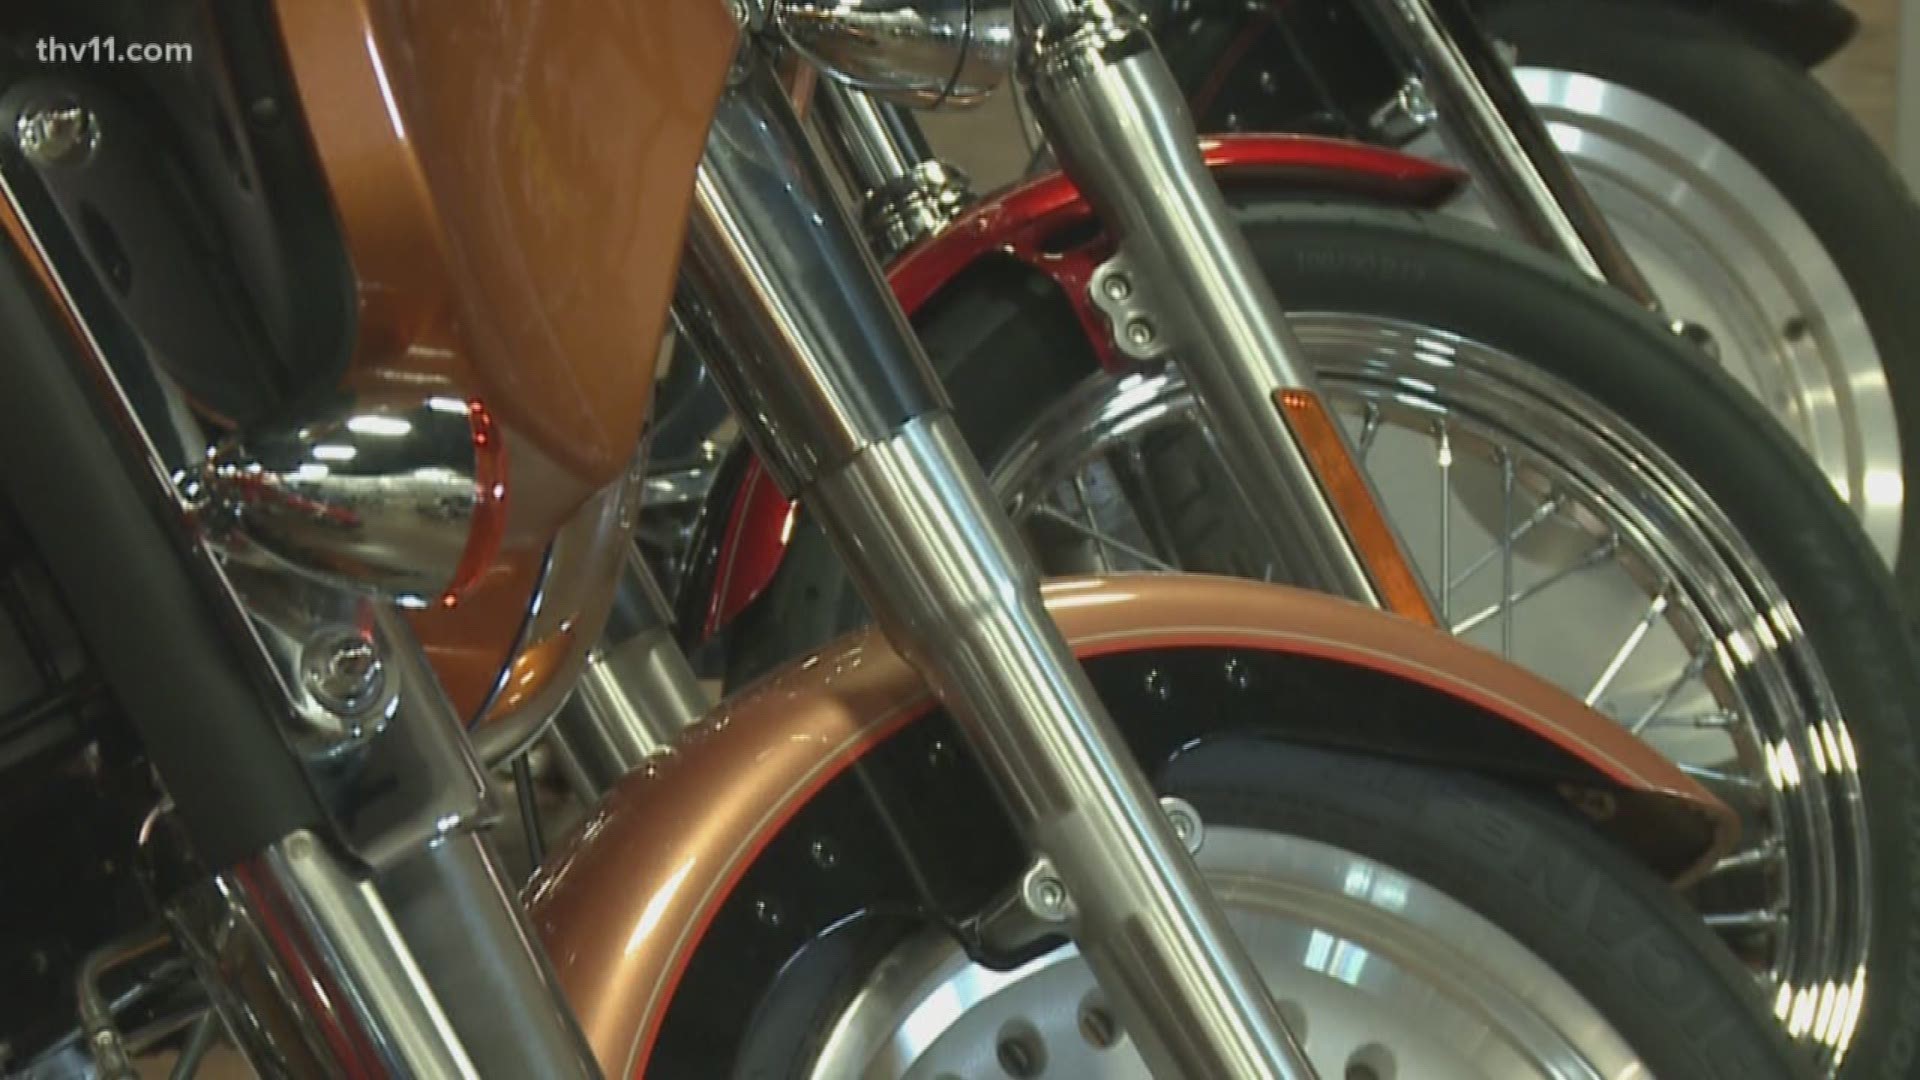 With warmer temps come nice rides, but police are wanting to make sure that people are staying safe when the dust off the motorcycle and hit the road.